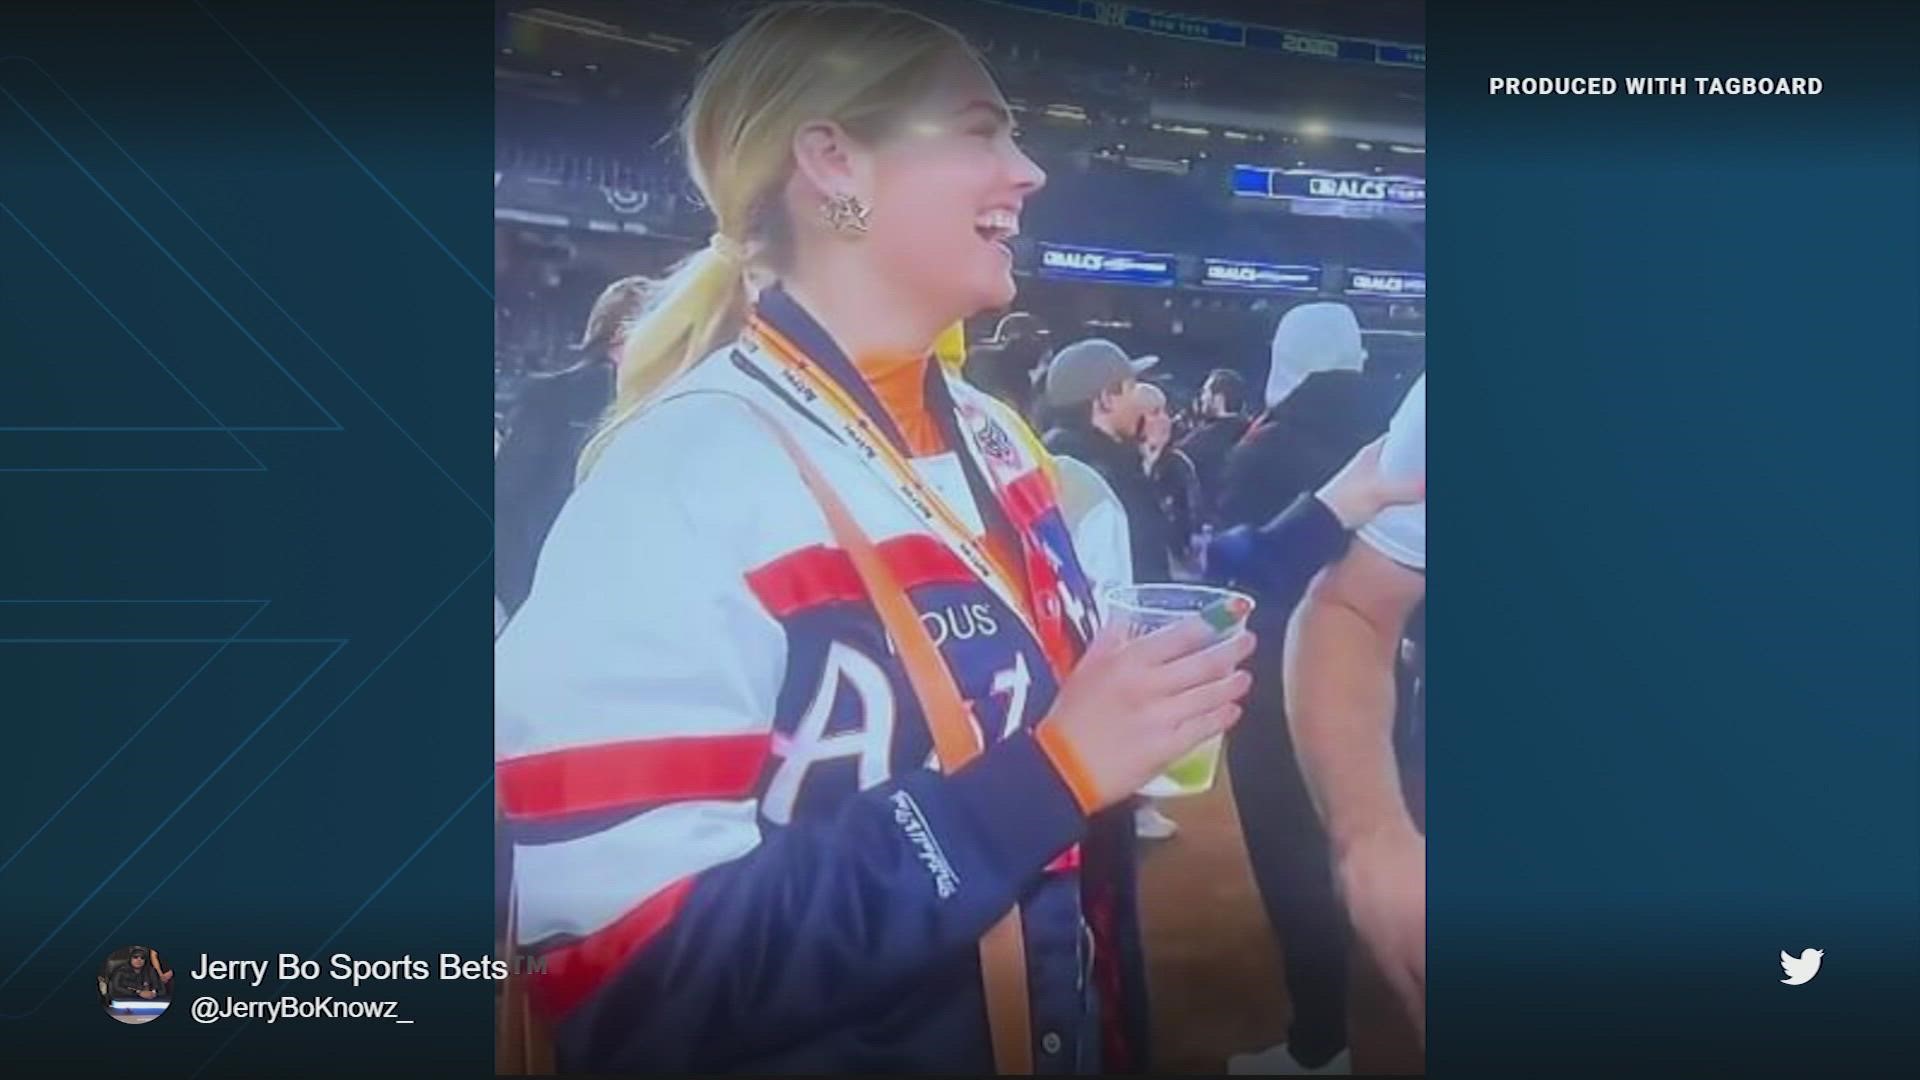 Kate Upton has done it again after igniting a fan firestorm over her vintage Houston Astros jacket, she wore during Game 4 of the ALCS.